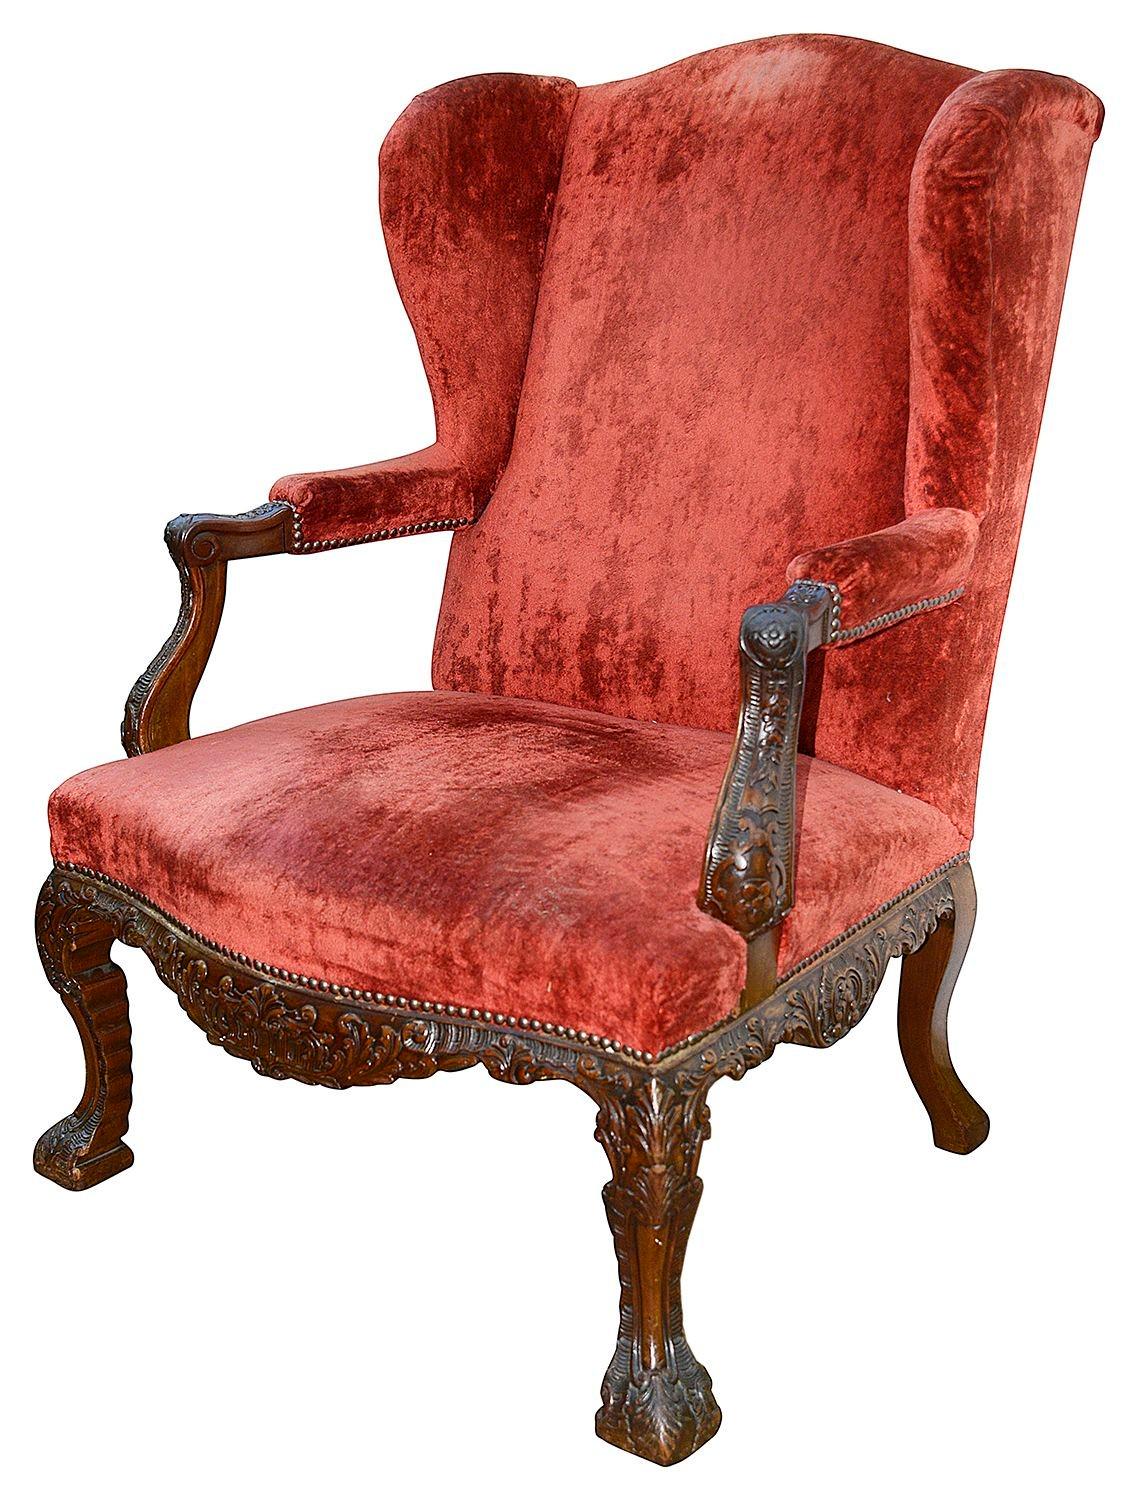 A very imposing and good quality pair of 18th century style Georgian Mahogany Gainsborough wing arm chairs, each with fine hand carved decoration to the arms, frieze and elegant cabriole legs. Silk velvet upholstery (showing some ware)

Batch 71